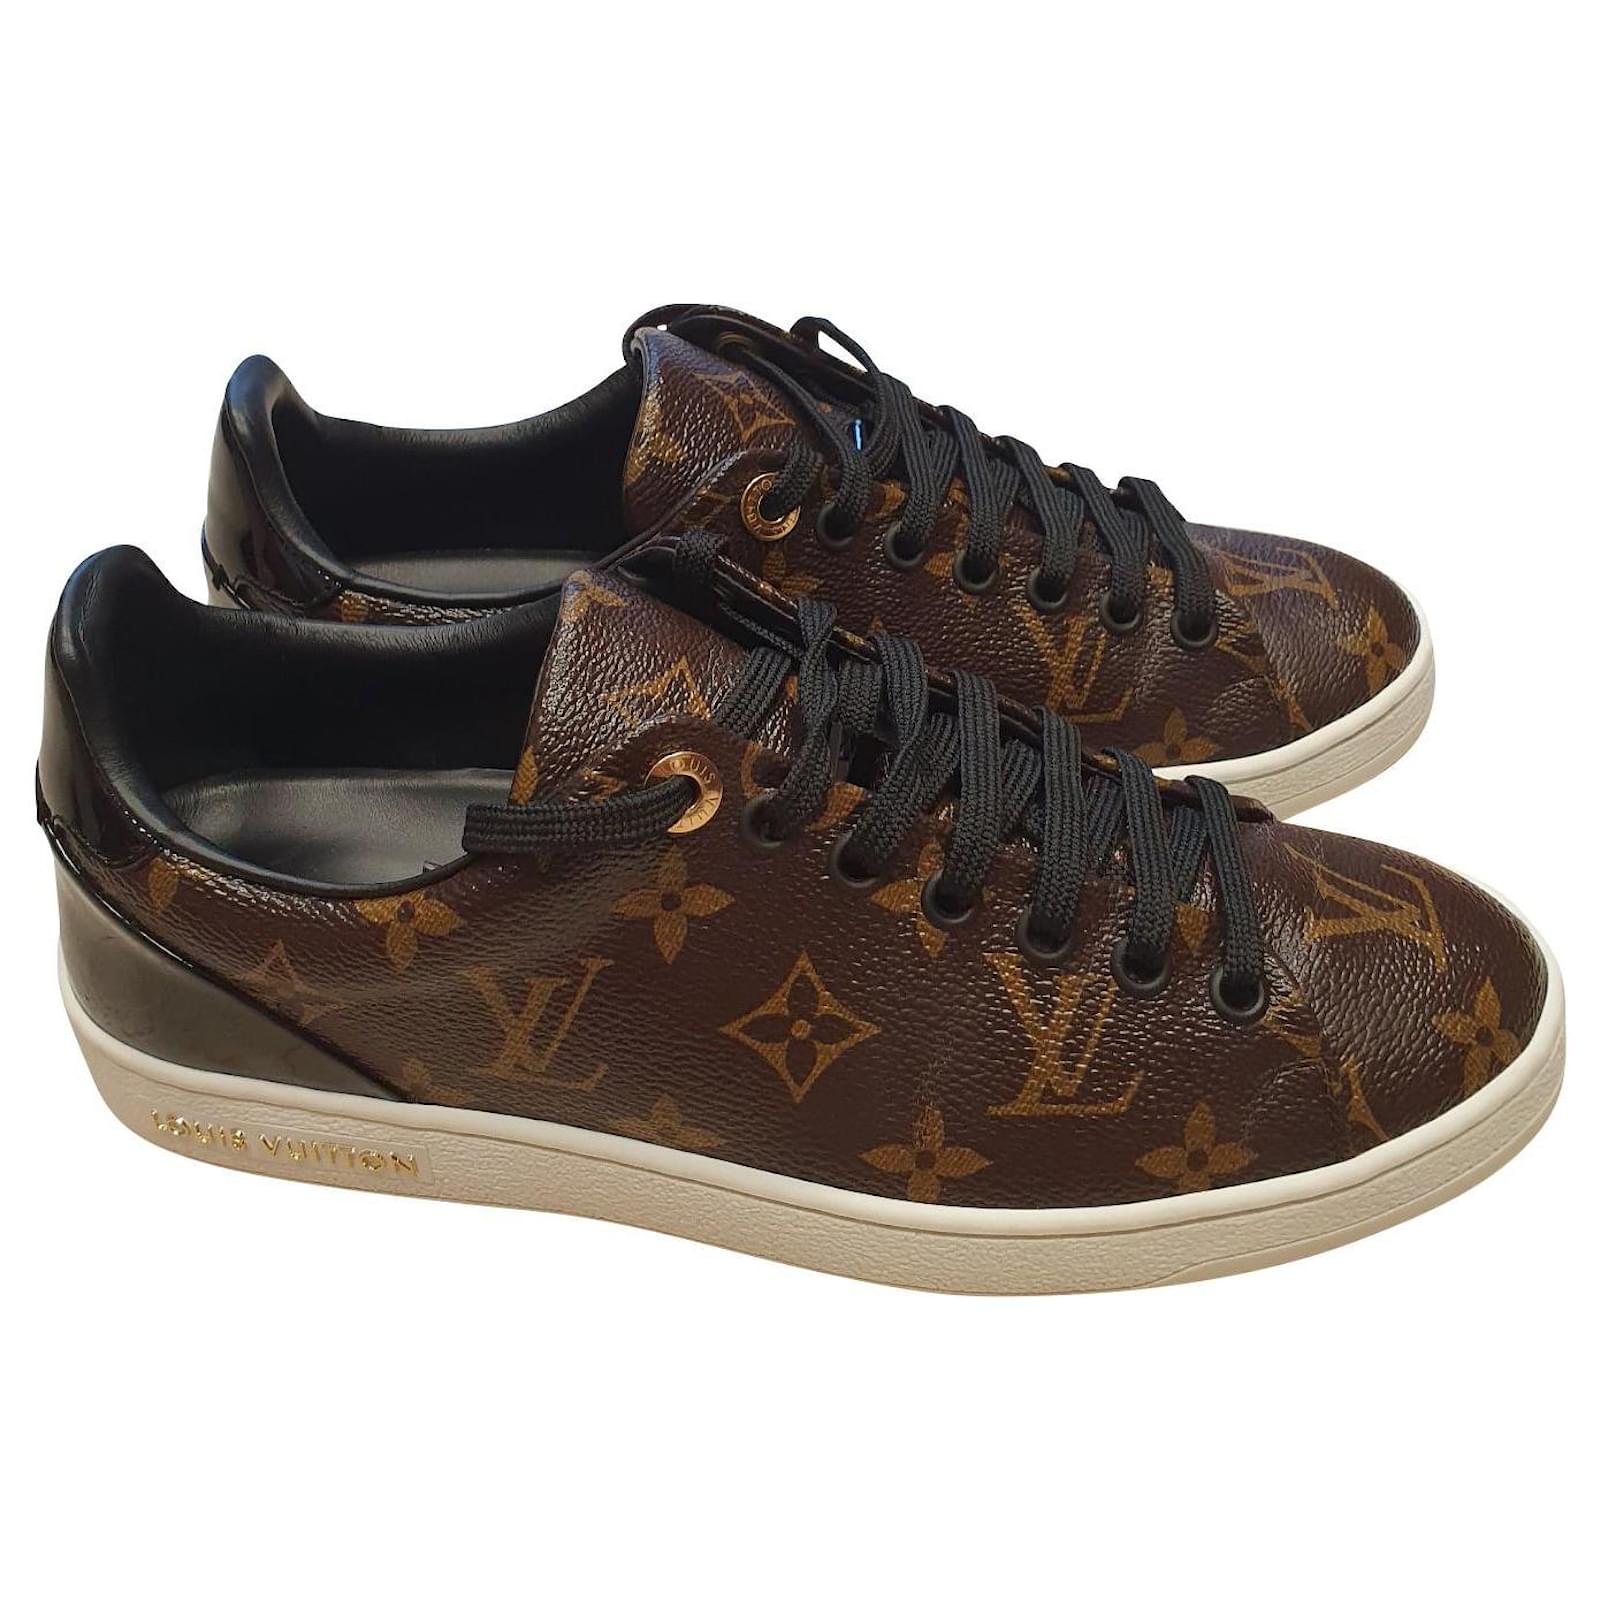 Louis Vuitton FRONTROW SNEAKERS Black White Golden Leather ref